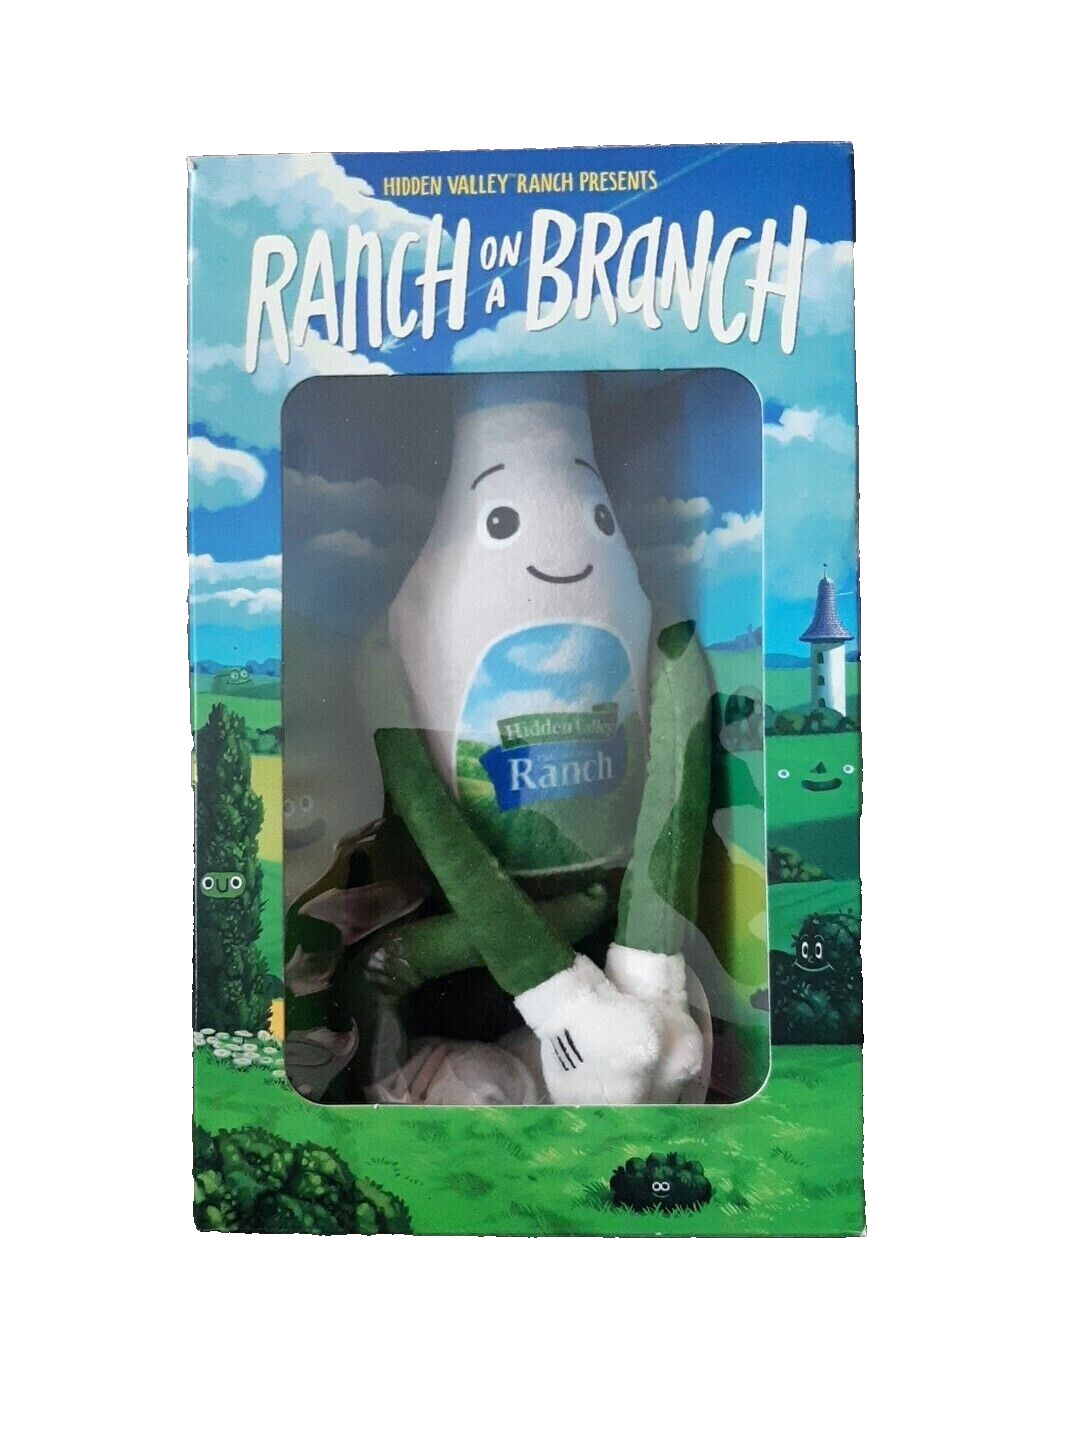 ￼ RANCH ON A BRANCH COLLECTIBLE BOXED SET - LIMITED EDITION Ships Today